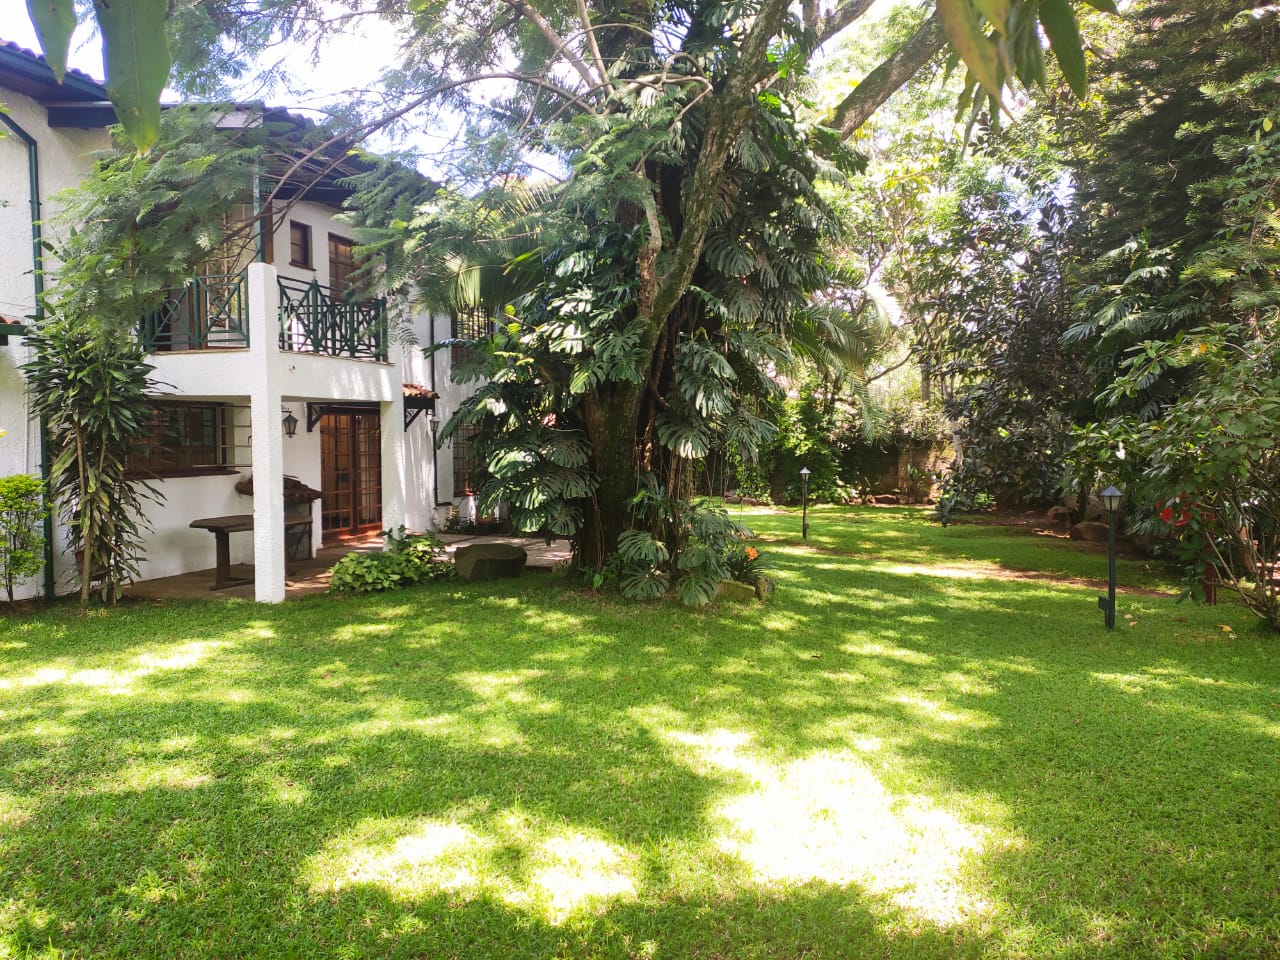 5 Bedroom Commercial Bungalow with a Garden in Lavington